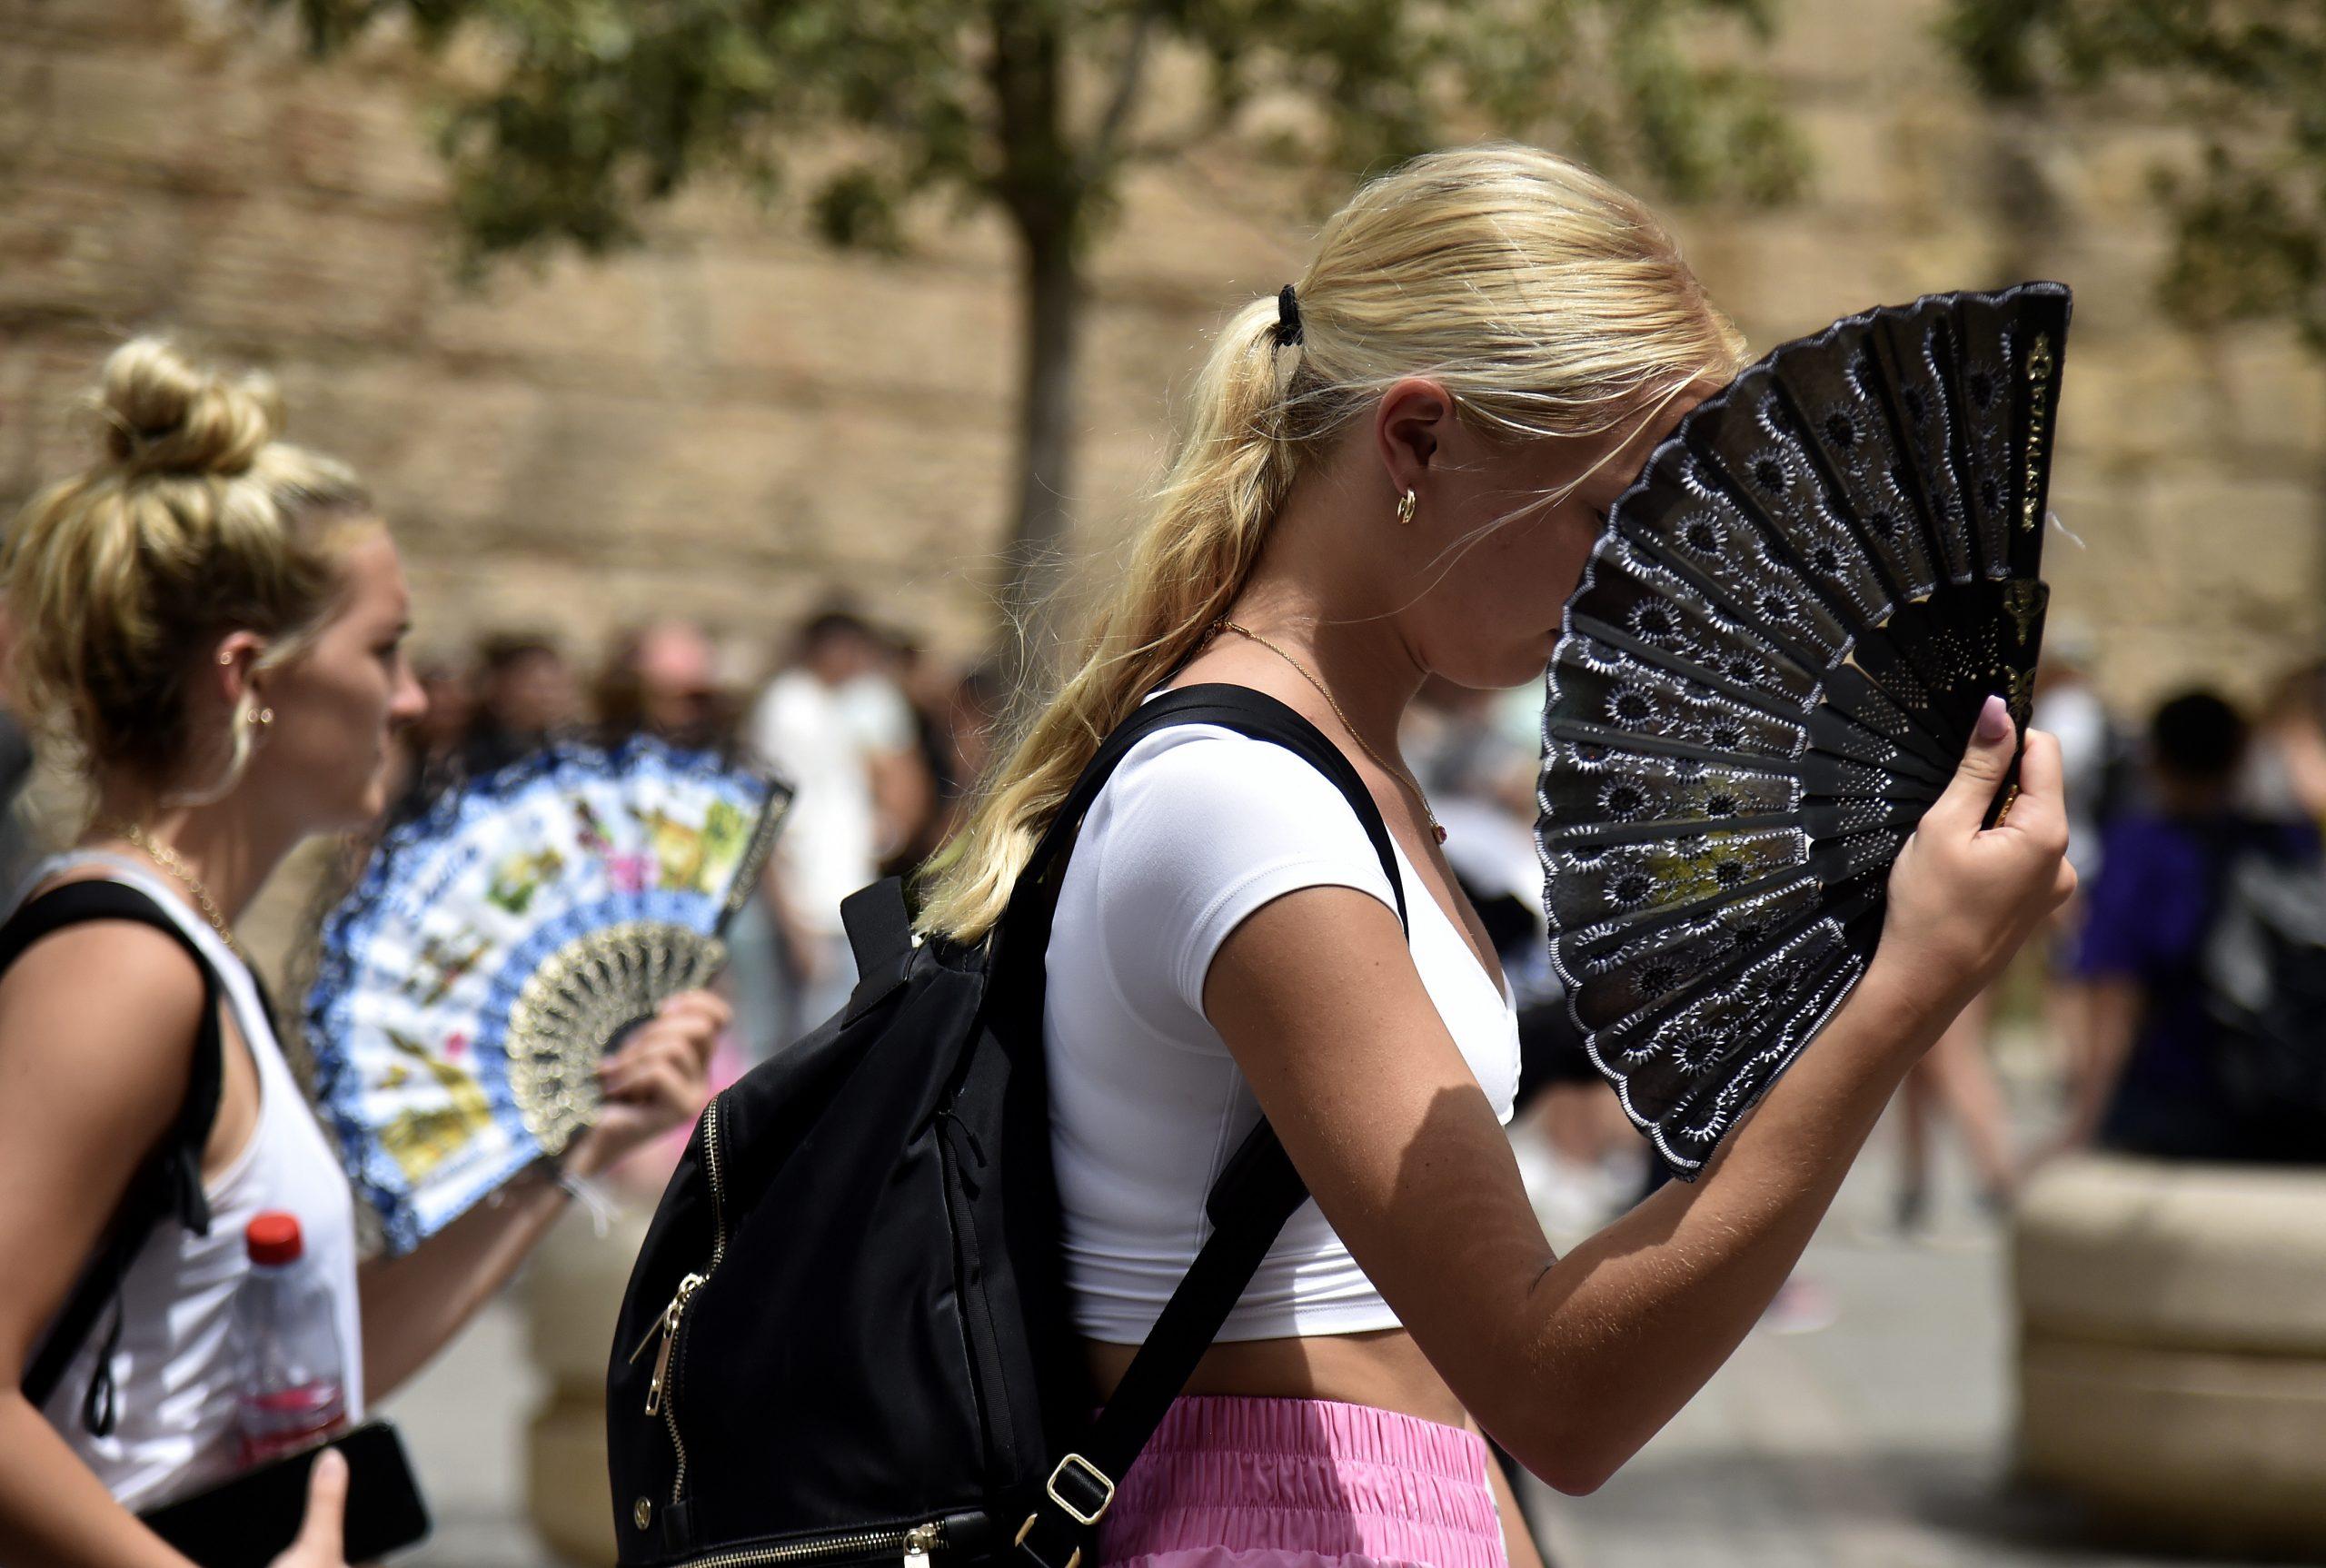 Two women use fans to fight the scorching heat during a heatwave in Seville on June 13. Photo: AFP